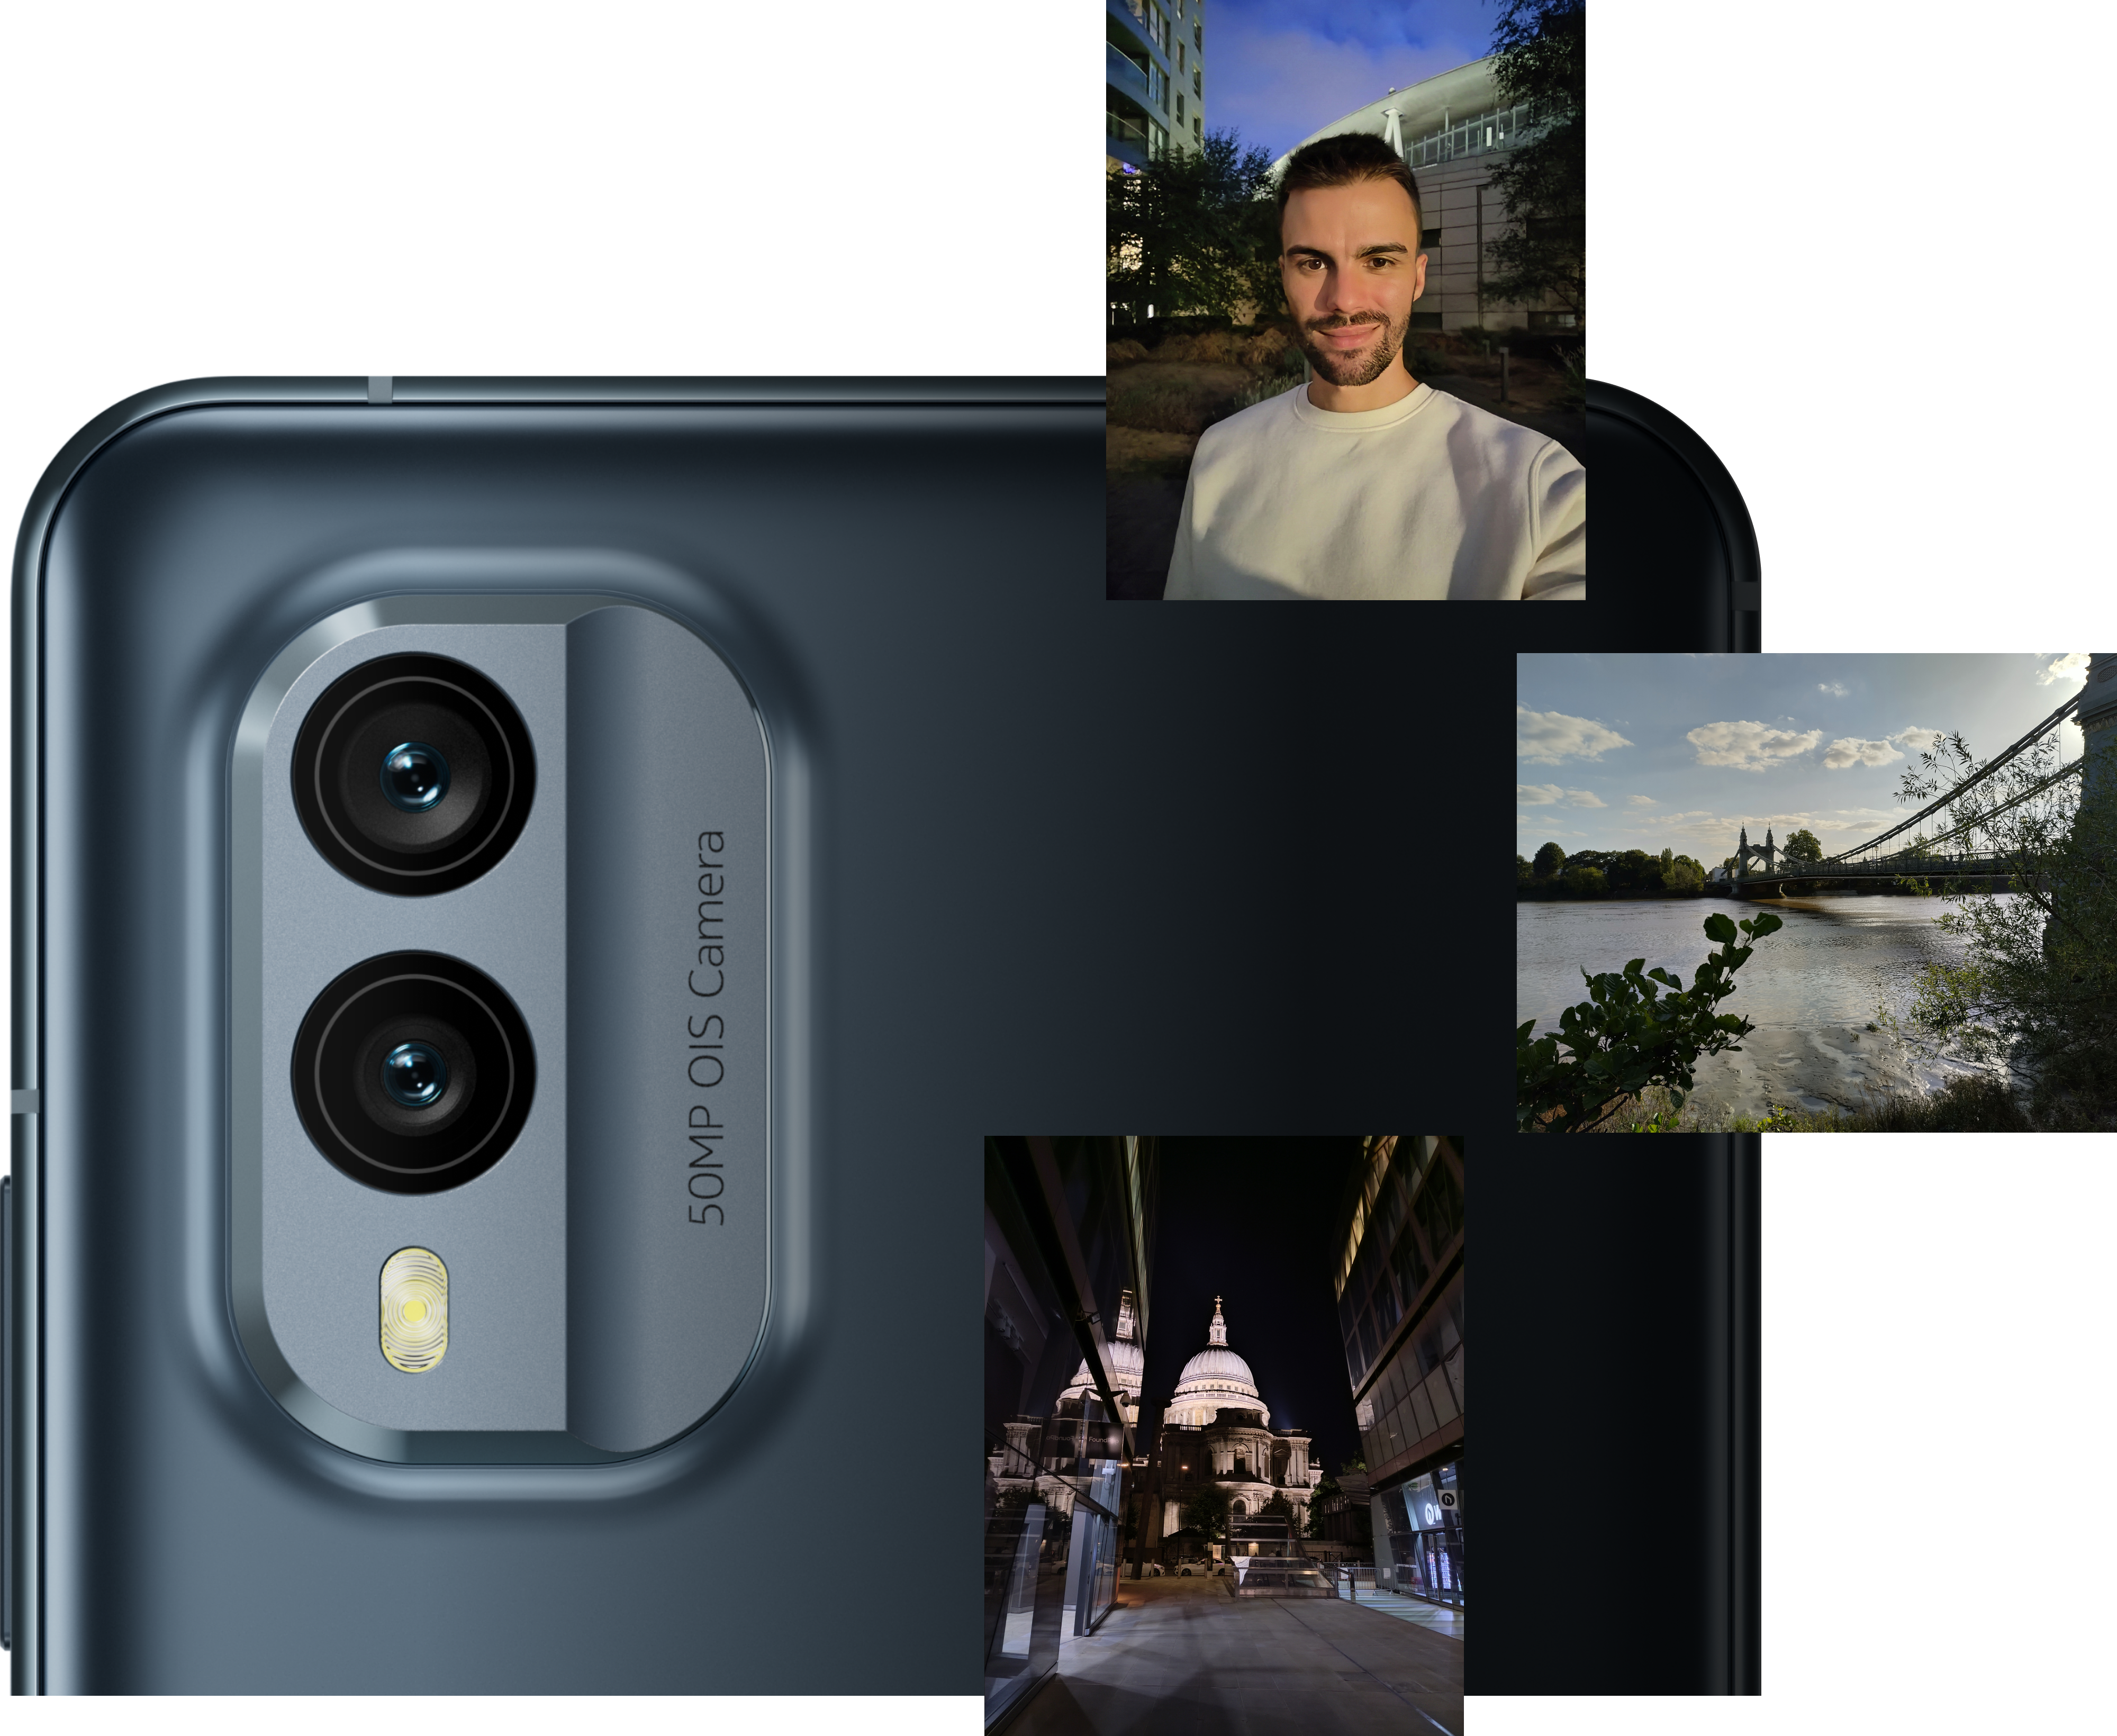 Nokia X30 5G sustainable smartphone with OIS camera | alle Smartphones